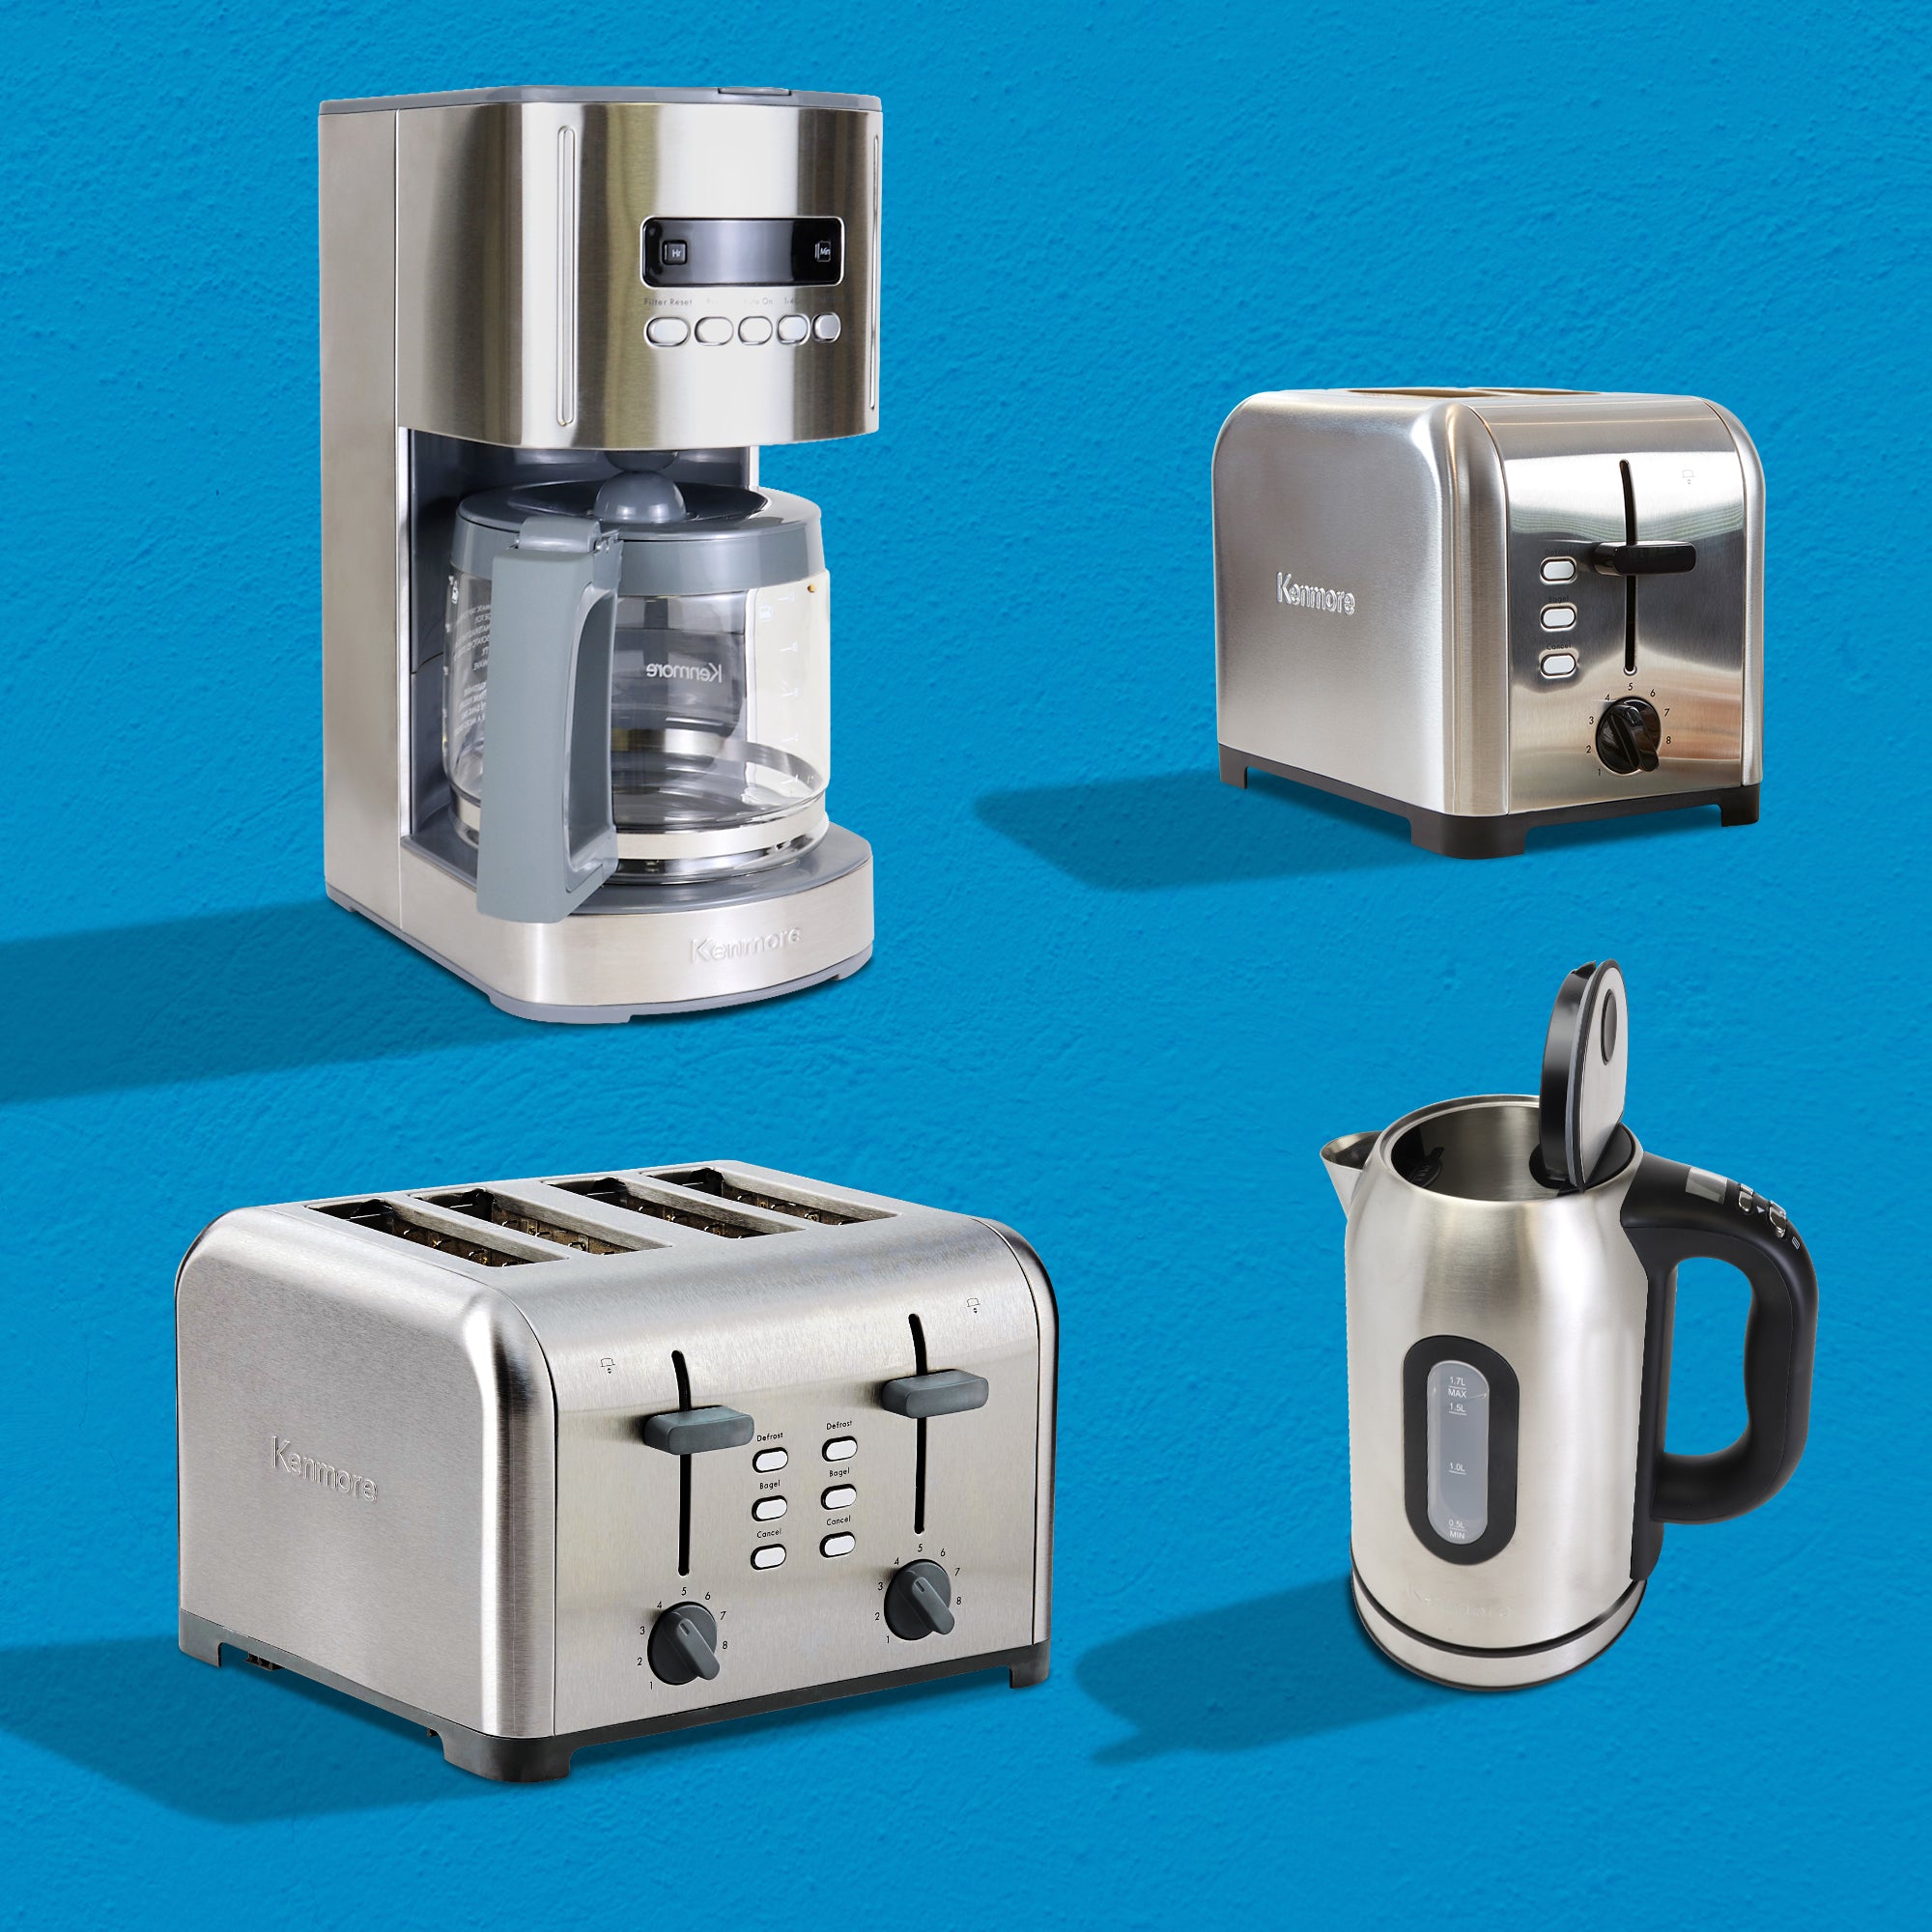 Four matching Kenmore small appliances (12-Cup Programmable Coffee Maker; 2-Slice Toaster; 4-Slice Toaster with Dual Controls; Programmable tea kettle) on a turquoise background